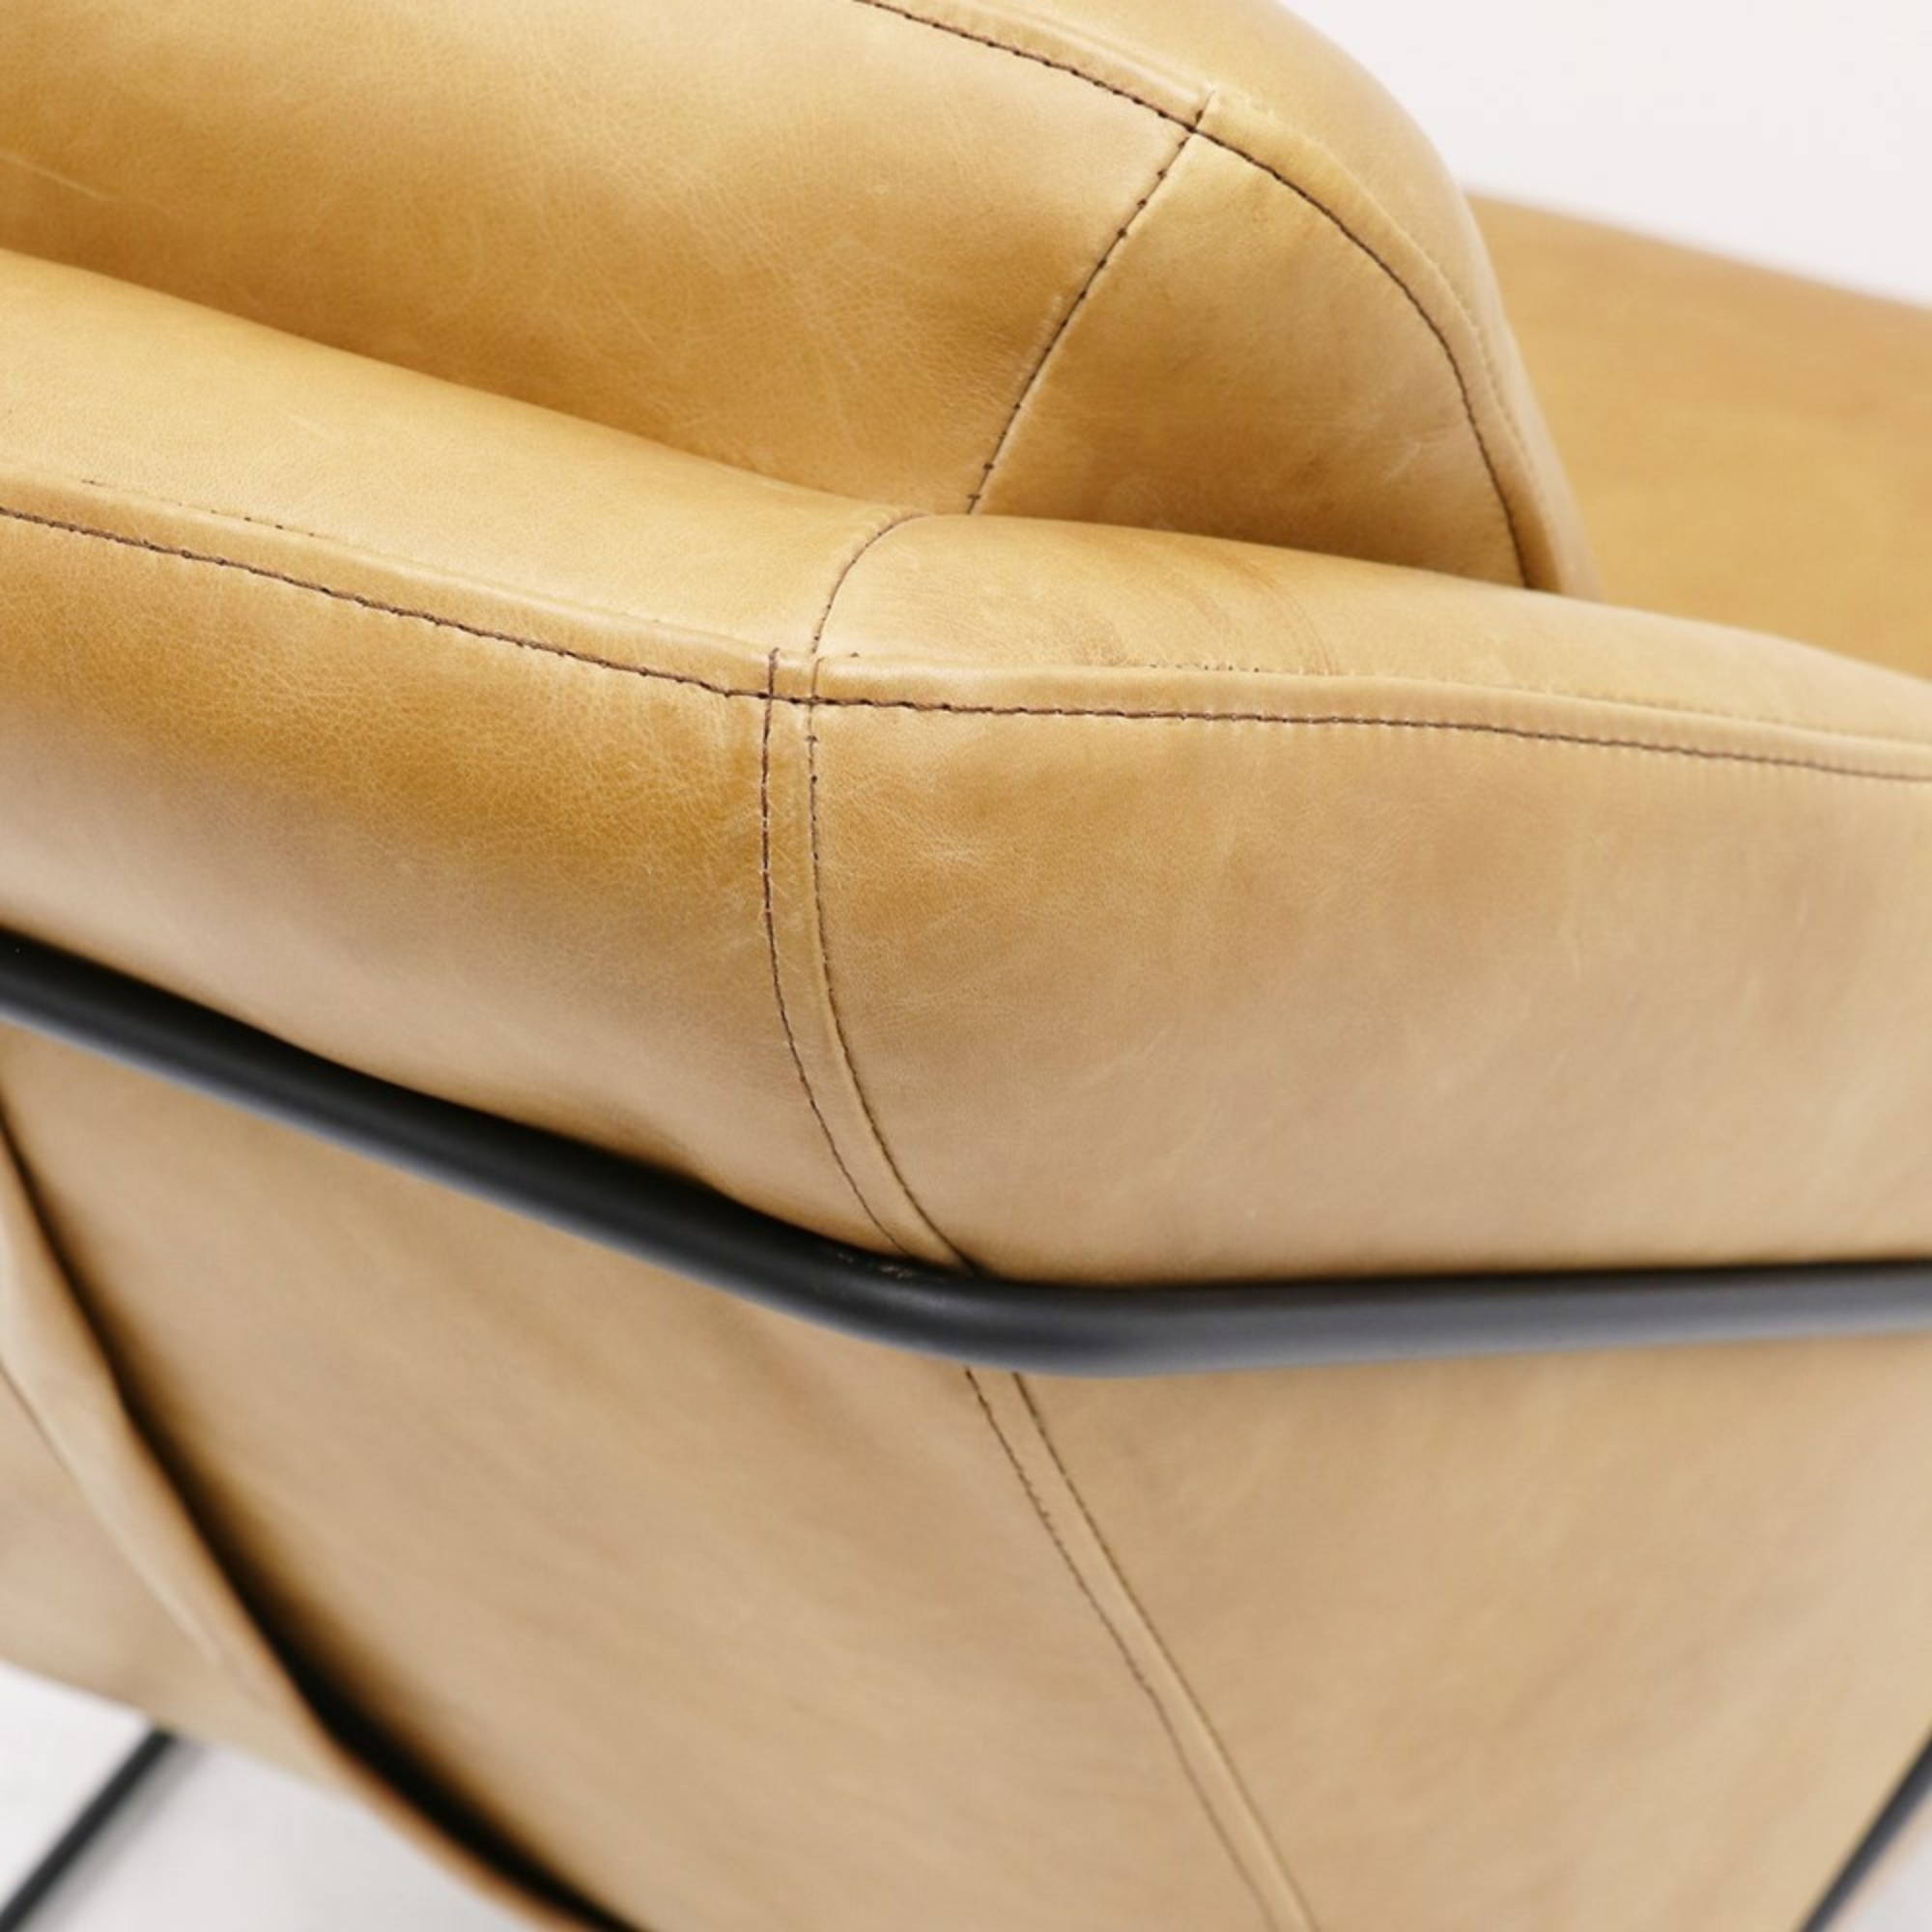 WORKSHOP LEATHER ARMCHAIR | 3 LEATHER COLOURS